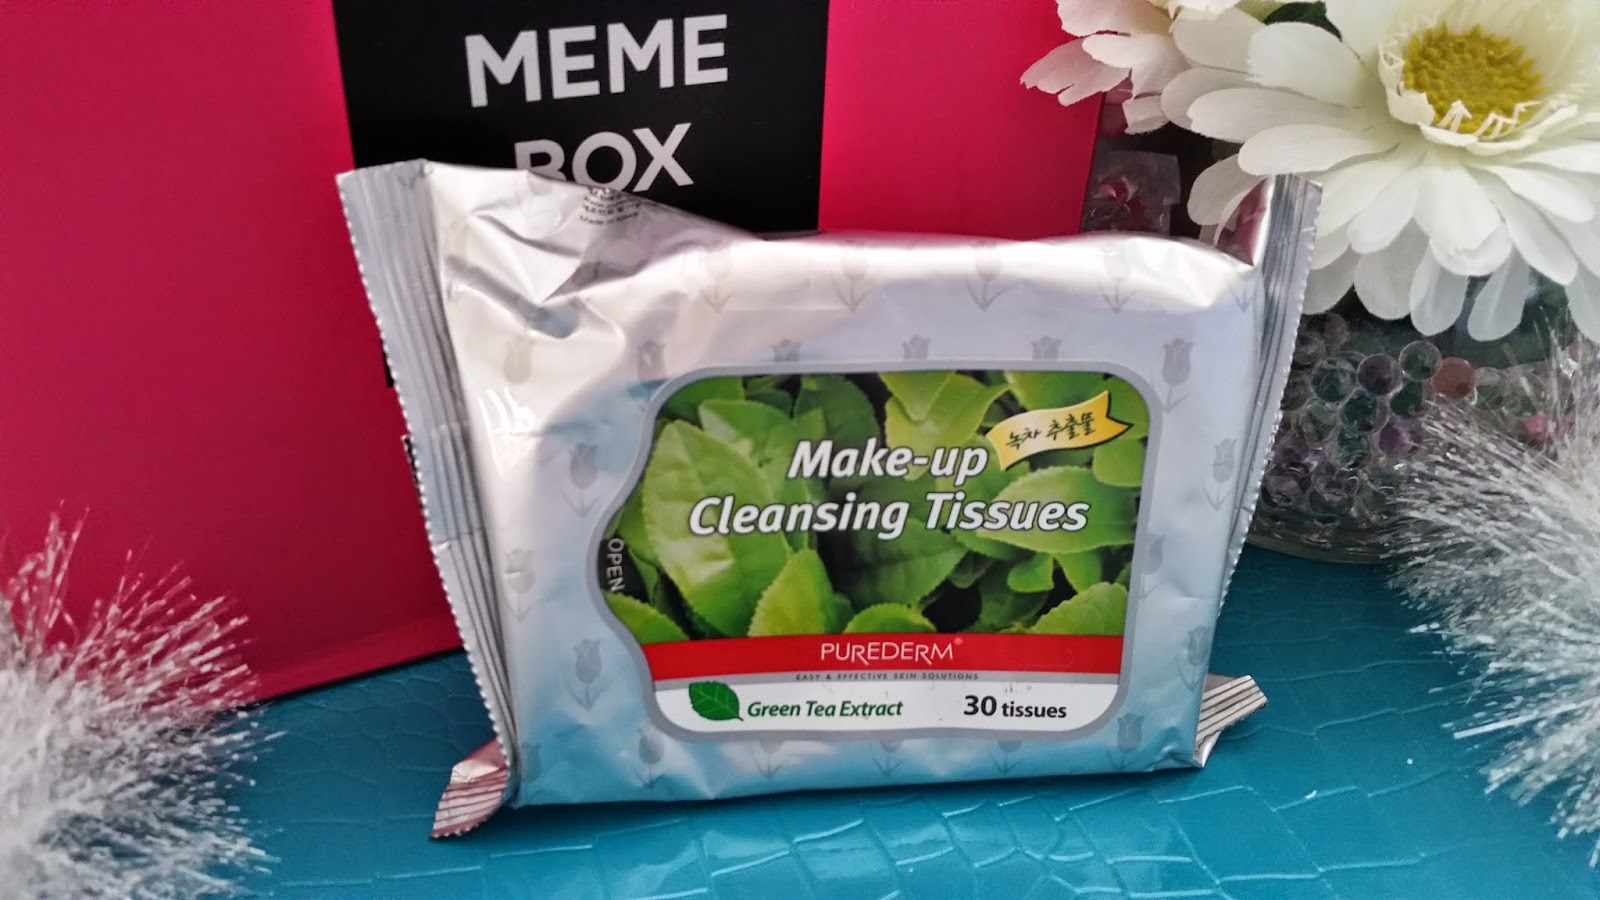  Purederm Make-up Cleansing Tissues